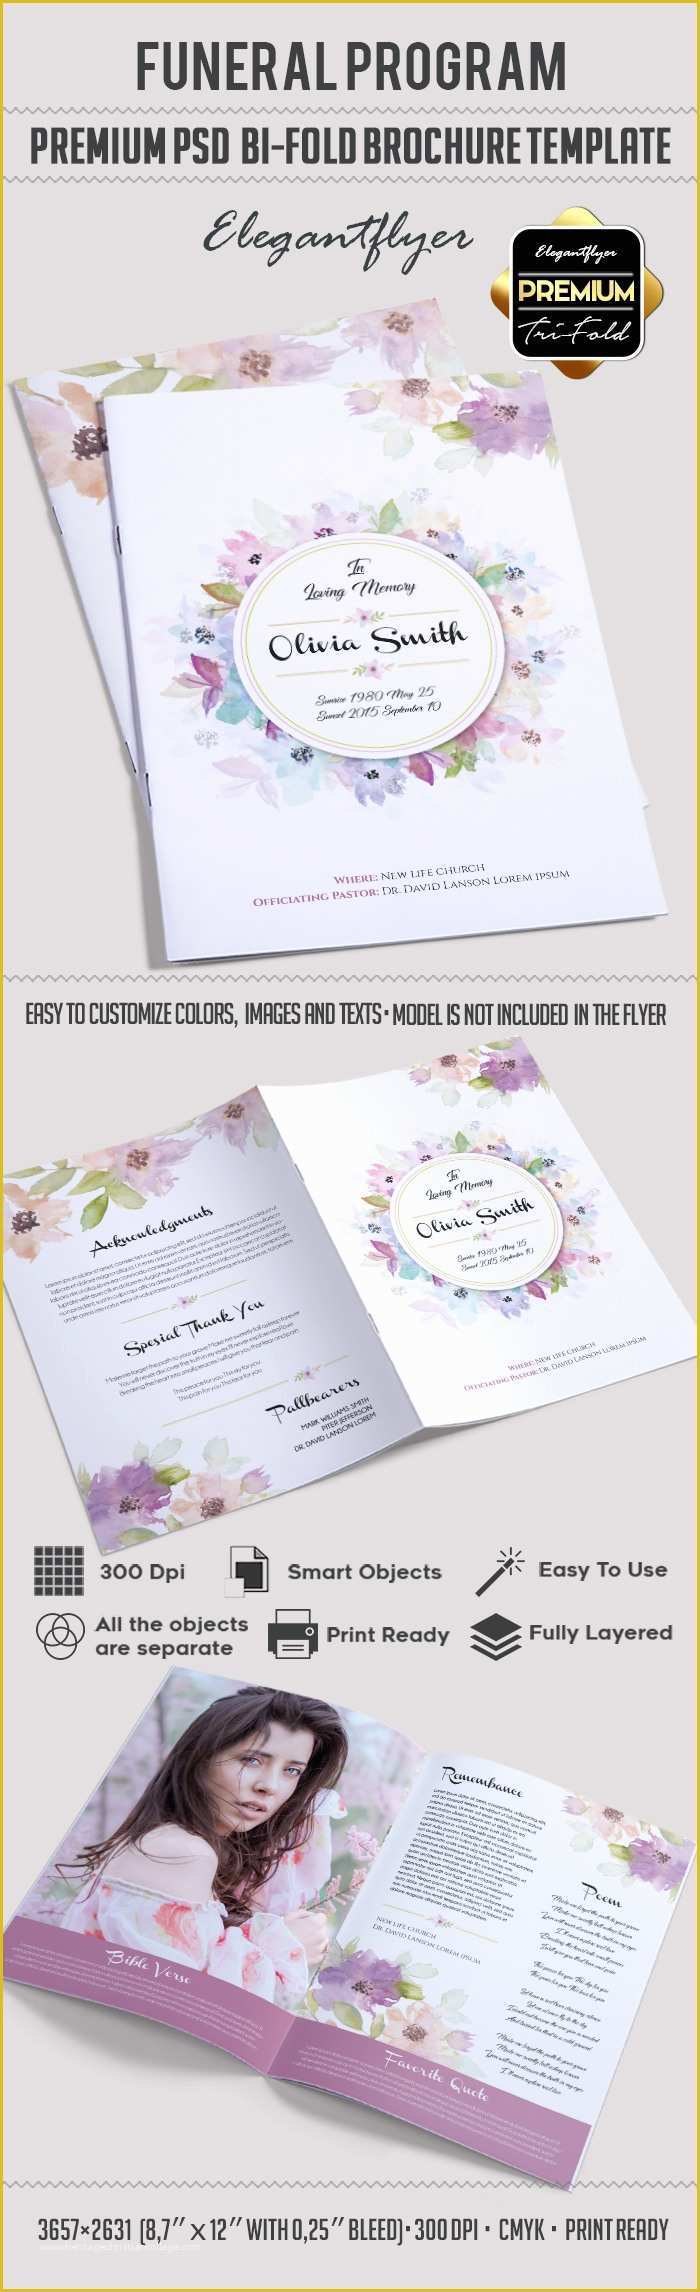 Free Funeral Flyer Template Psd Of Program for Funeral Template – by Elegantflyer